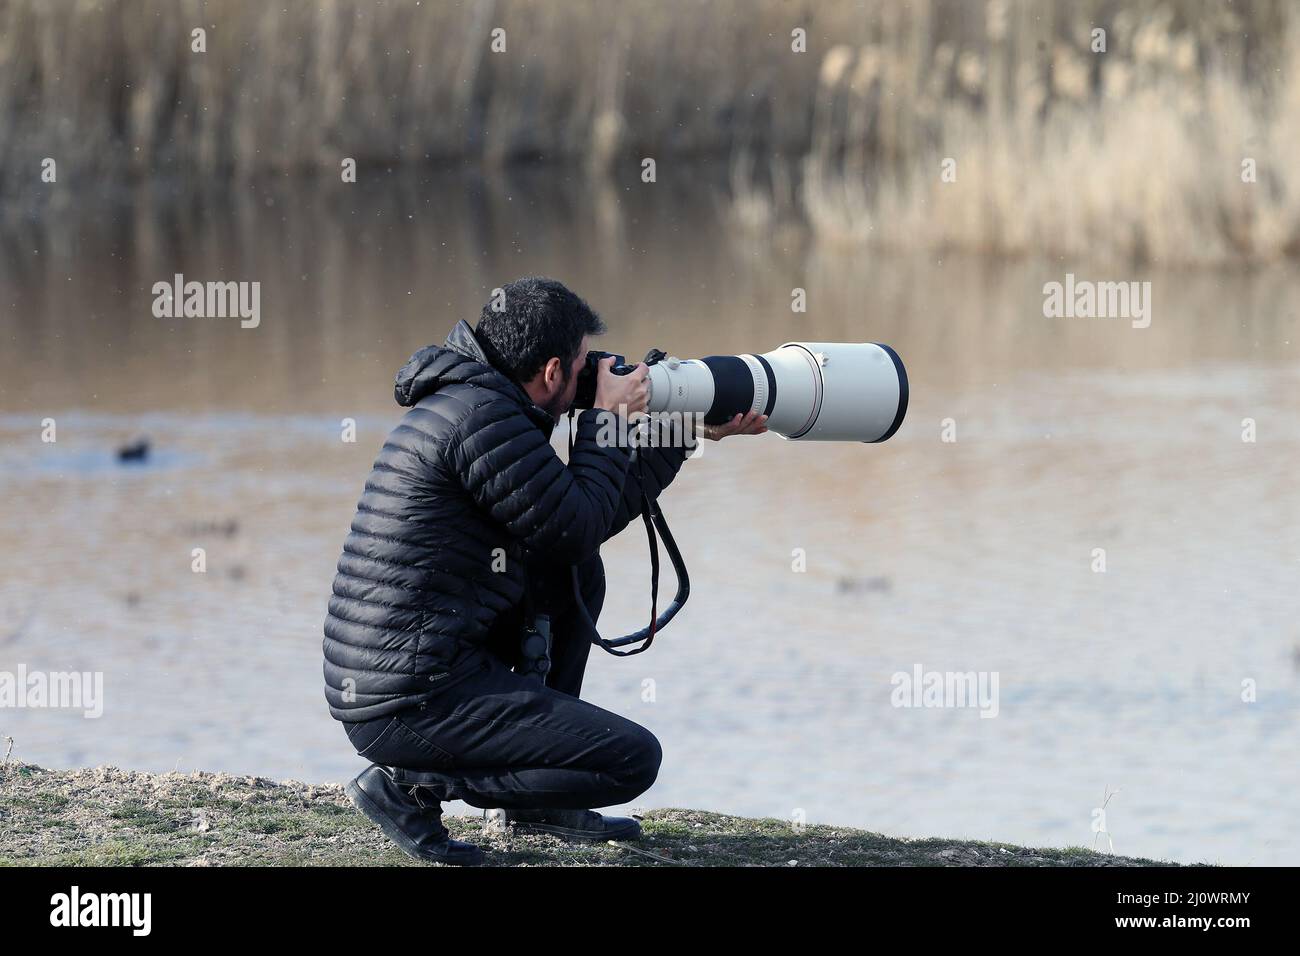 Ankara, Turkey. 18th Mar, 2022. Emin Yogurtcuoglu, a 35-year-old bird watcher, takes photos at Lake Mogan in Ankara, Turkey, on March 18, 2022. Emin Yogurtcuoglu, a Turkish self-proclaimed 'bird detective,' is constantly seeking new bird species around the world, and he wants to make his next trip to China, land of many species and home to abundant wildlife. TO GO WITH 'Feature: Turkish bird watcher eager to visit China, land of wildlife protection' Credit: Mustafa Kaya/Xinhua/Alamy Live News Stock Photo